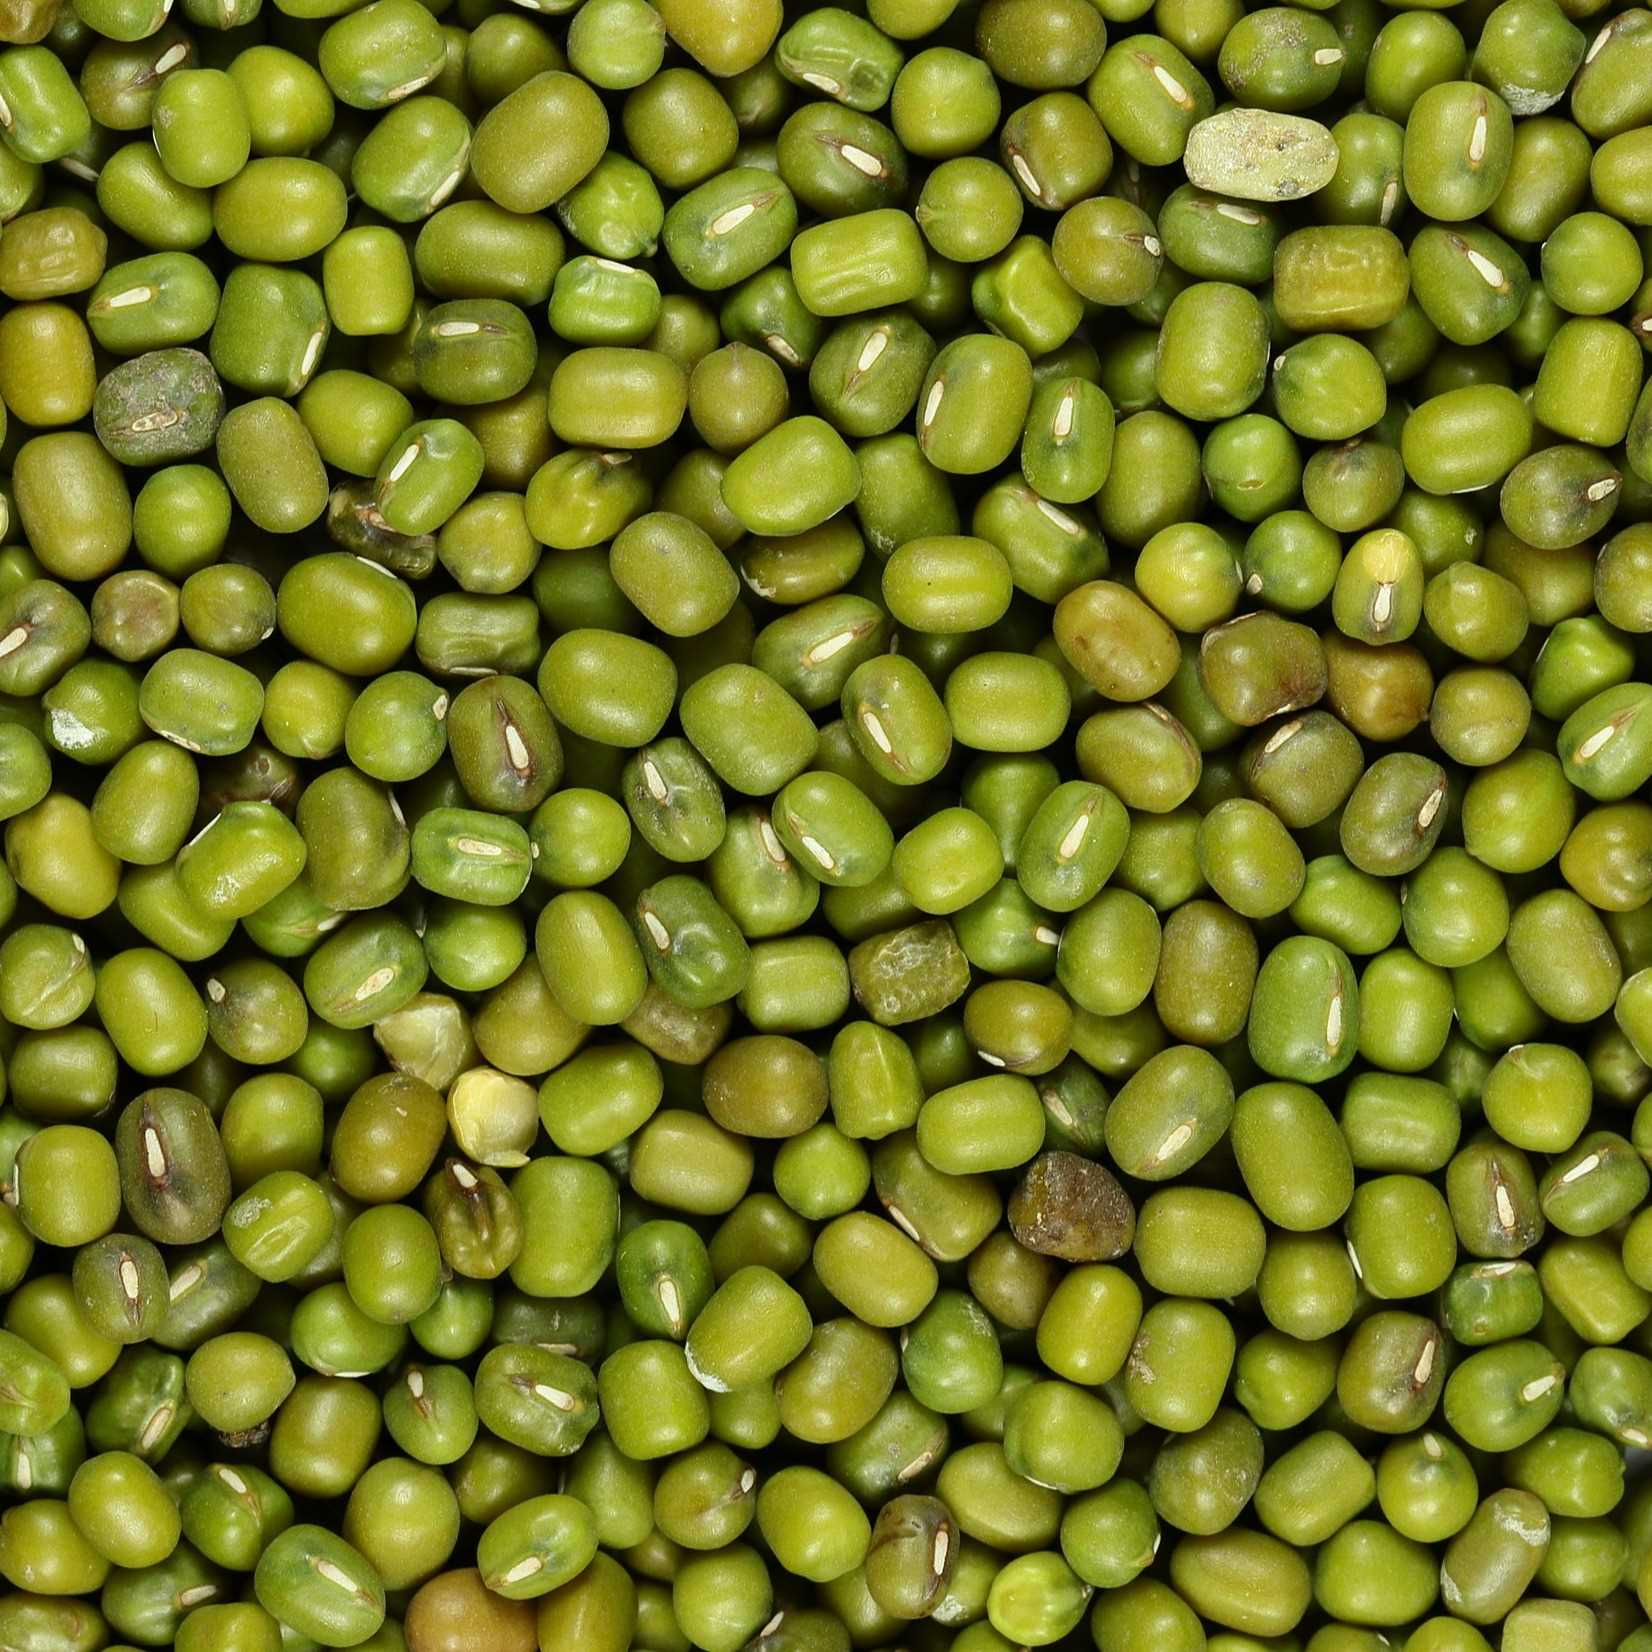 i'm looking for Mung bean